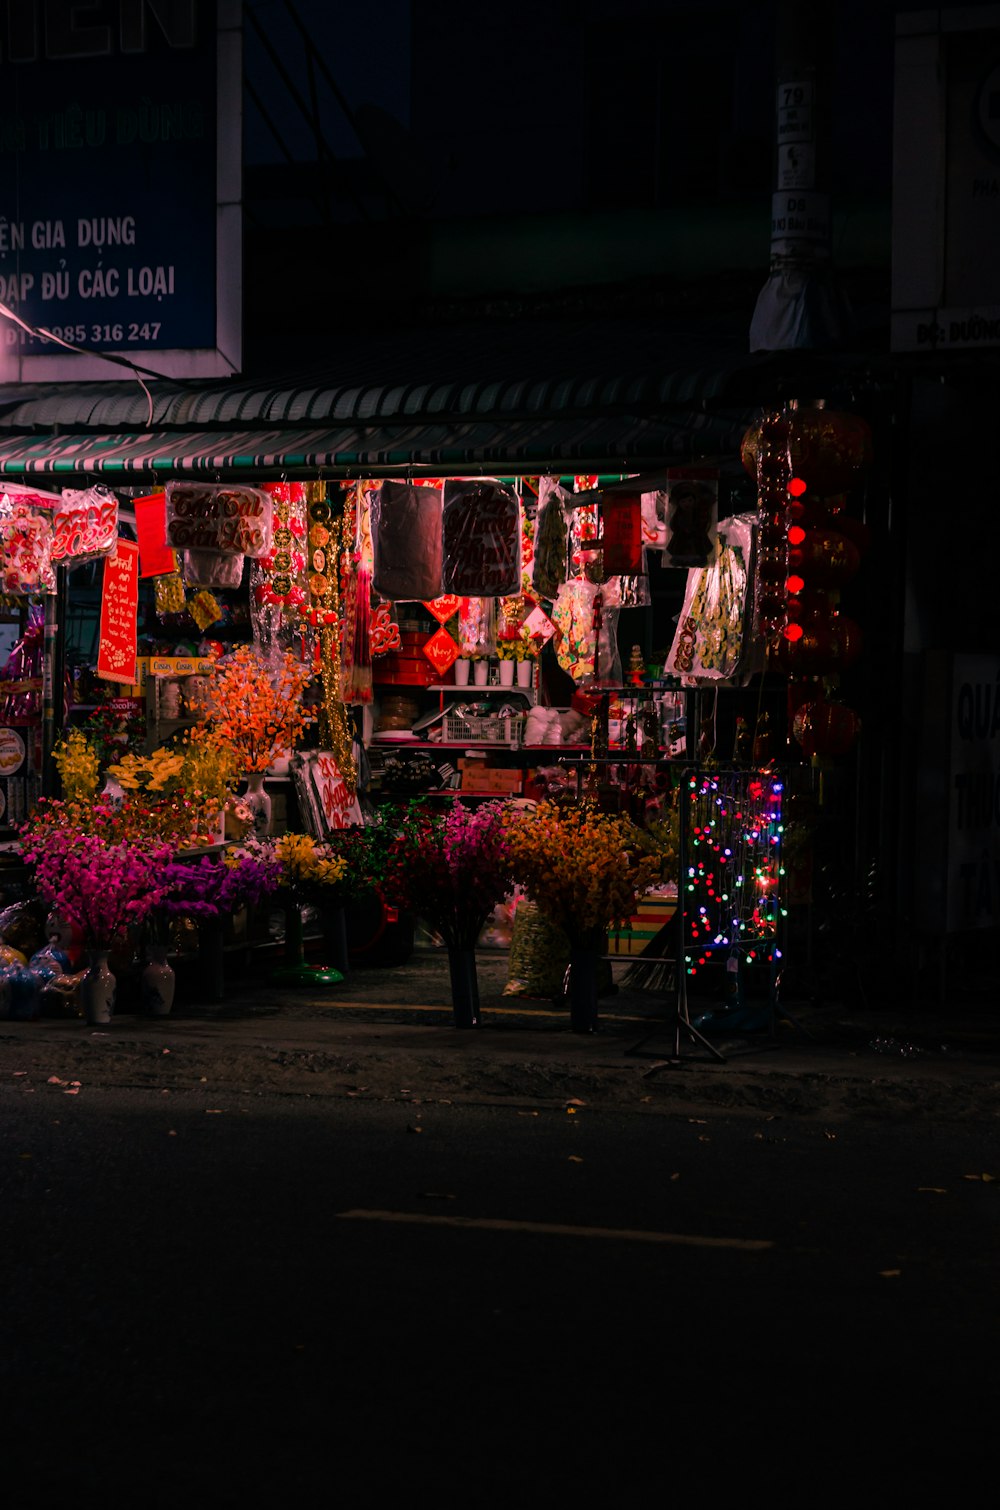 a dark street with a bunch of flowers on display